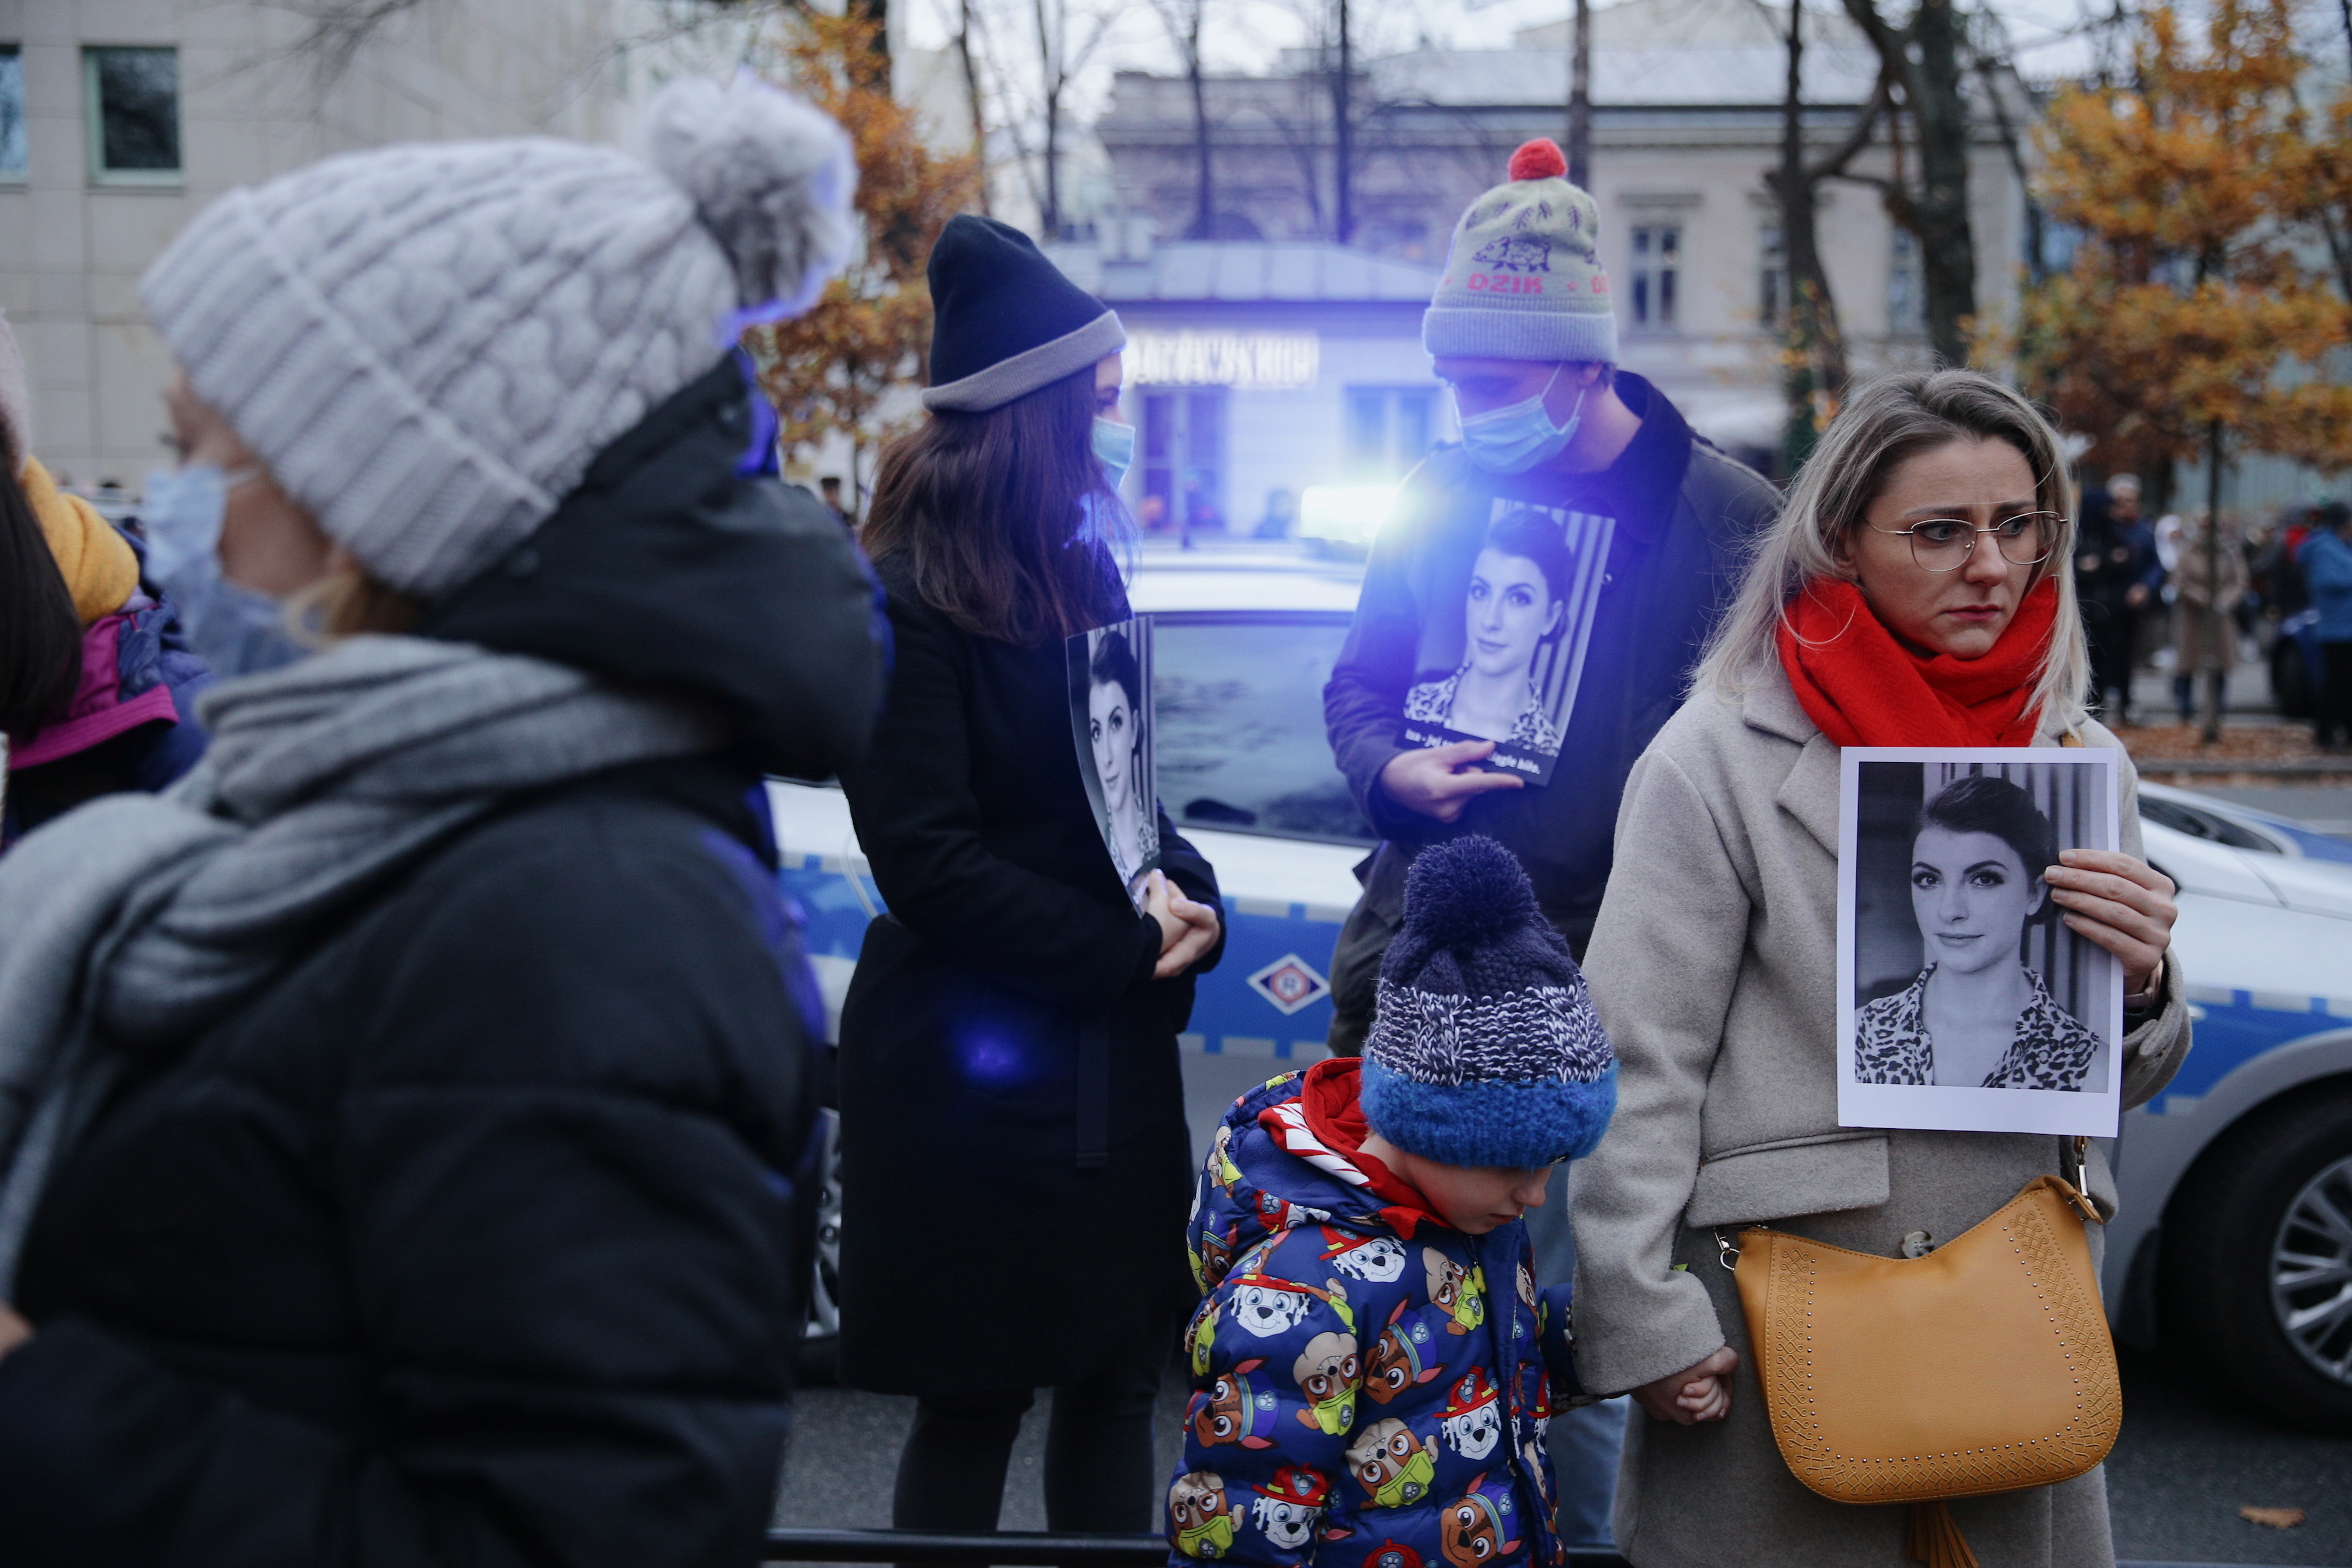 People protest after a death of Izabela, a 30-year-old woman in the 22nd week of pregnancy with activists saying she could still be alive if the abortion law wouldn't be so strict in Warsaw, Poland November 6, 2021. David Zuchowicz/Agencja Wyborcza.pl via REUTERS   